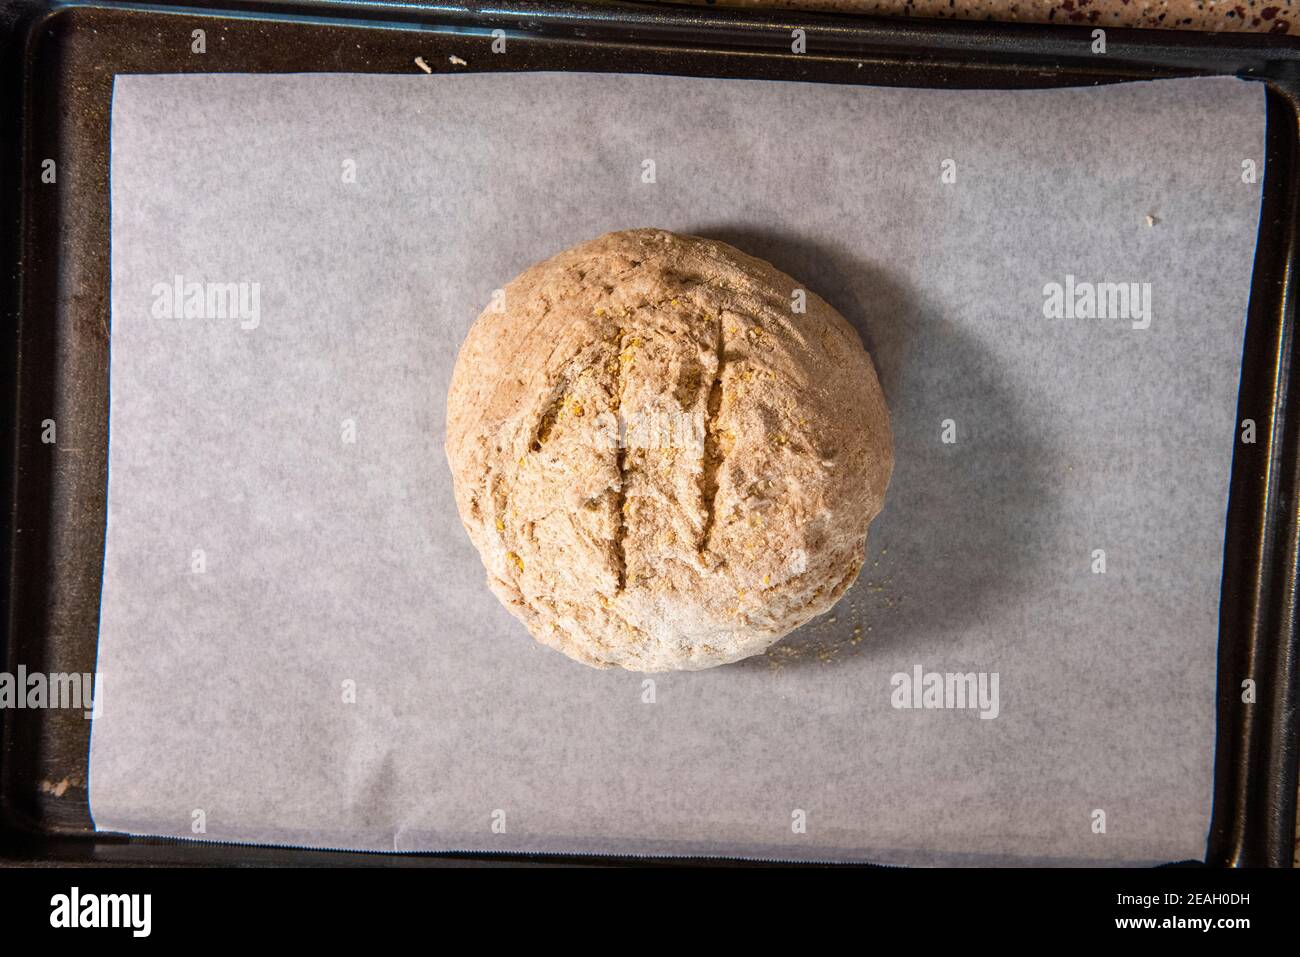 A ball of bread dough is placed on parchment paper and ready to be put into the over to be baked.  Series step-by-step making homemade bread.  Frame 1 Stock Photo